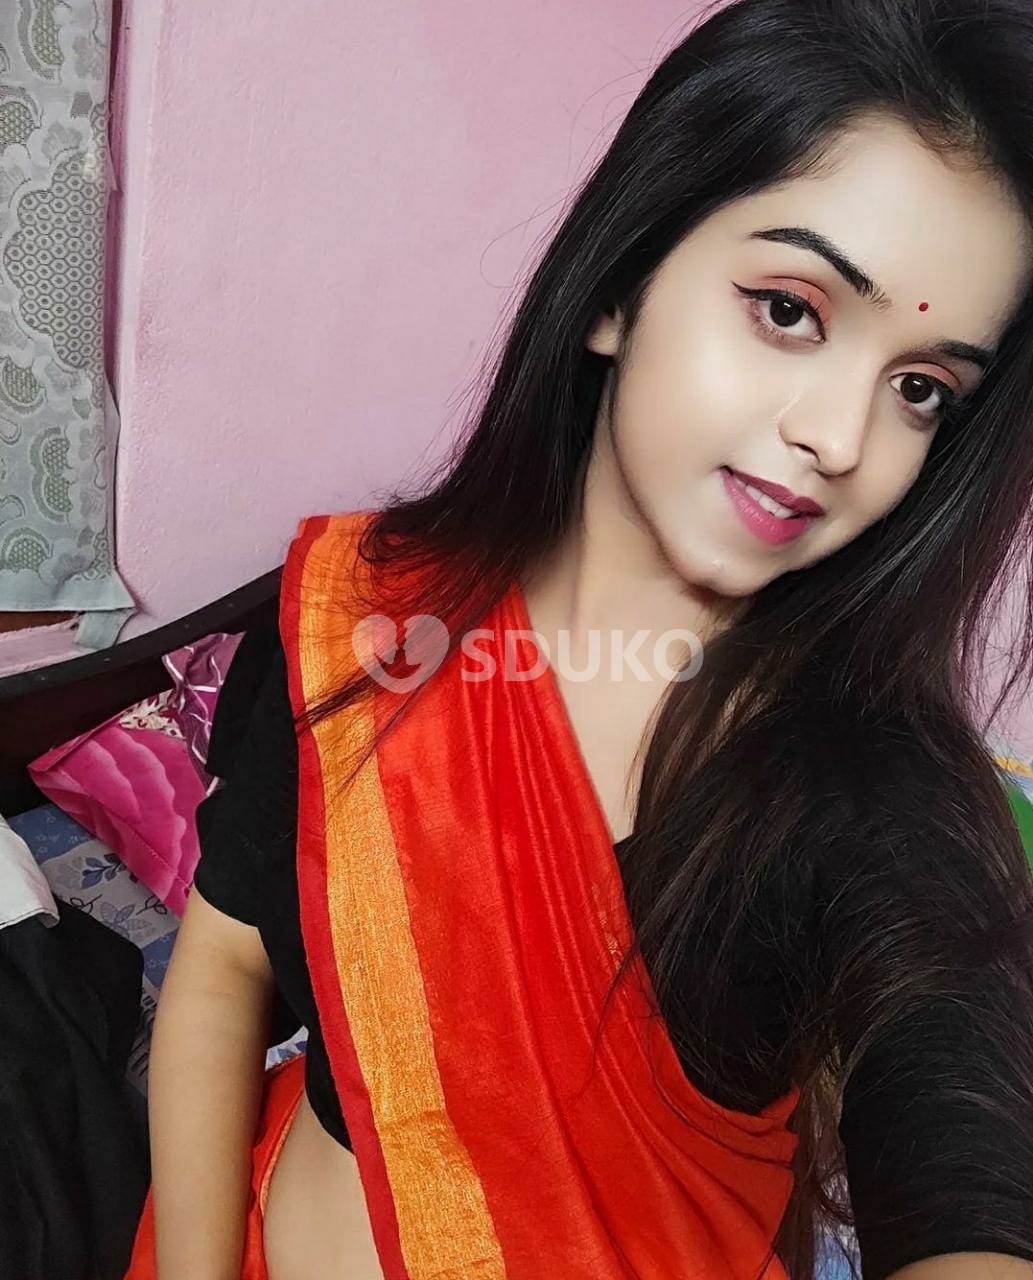 🔥🔥🔥 NASHIK LOCAL BEST AFFORDABLE VIP MARATHI COLLAGE GIRLS AVAILABLE IN